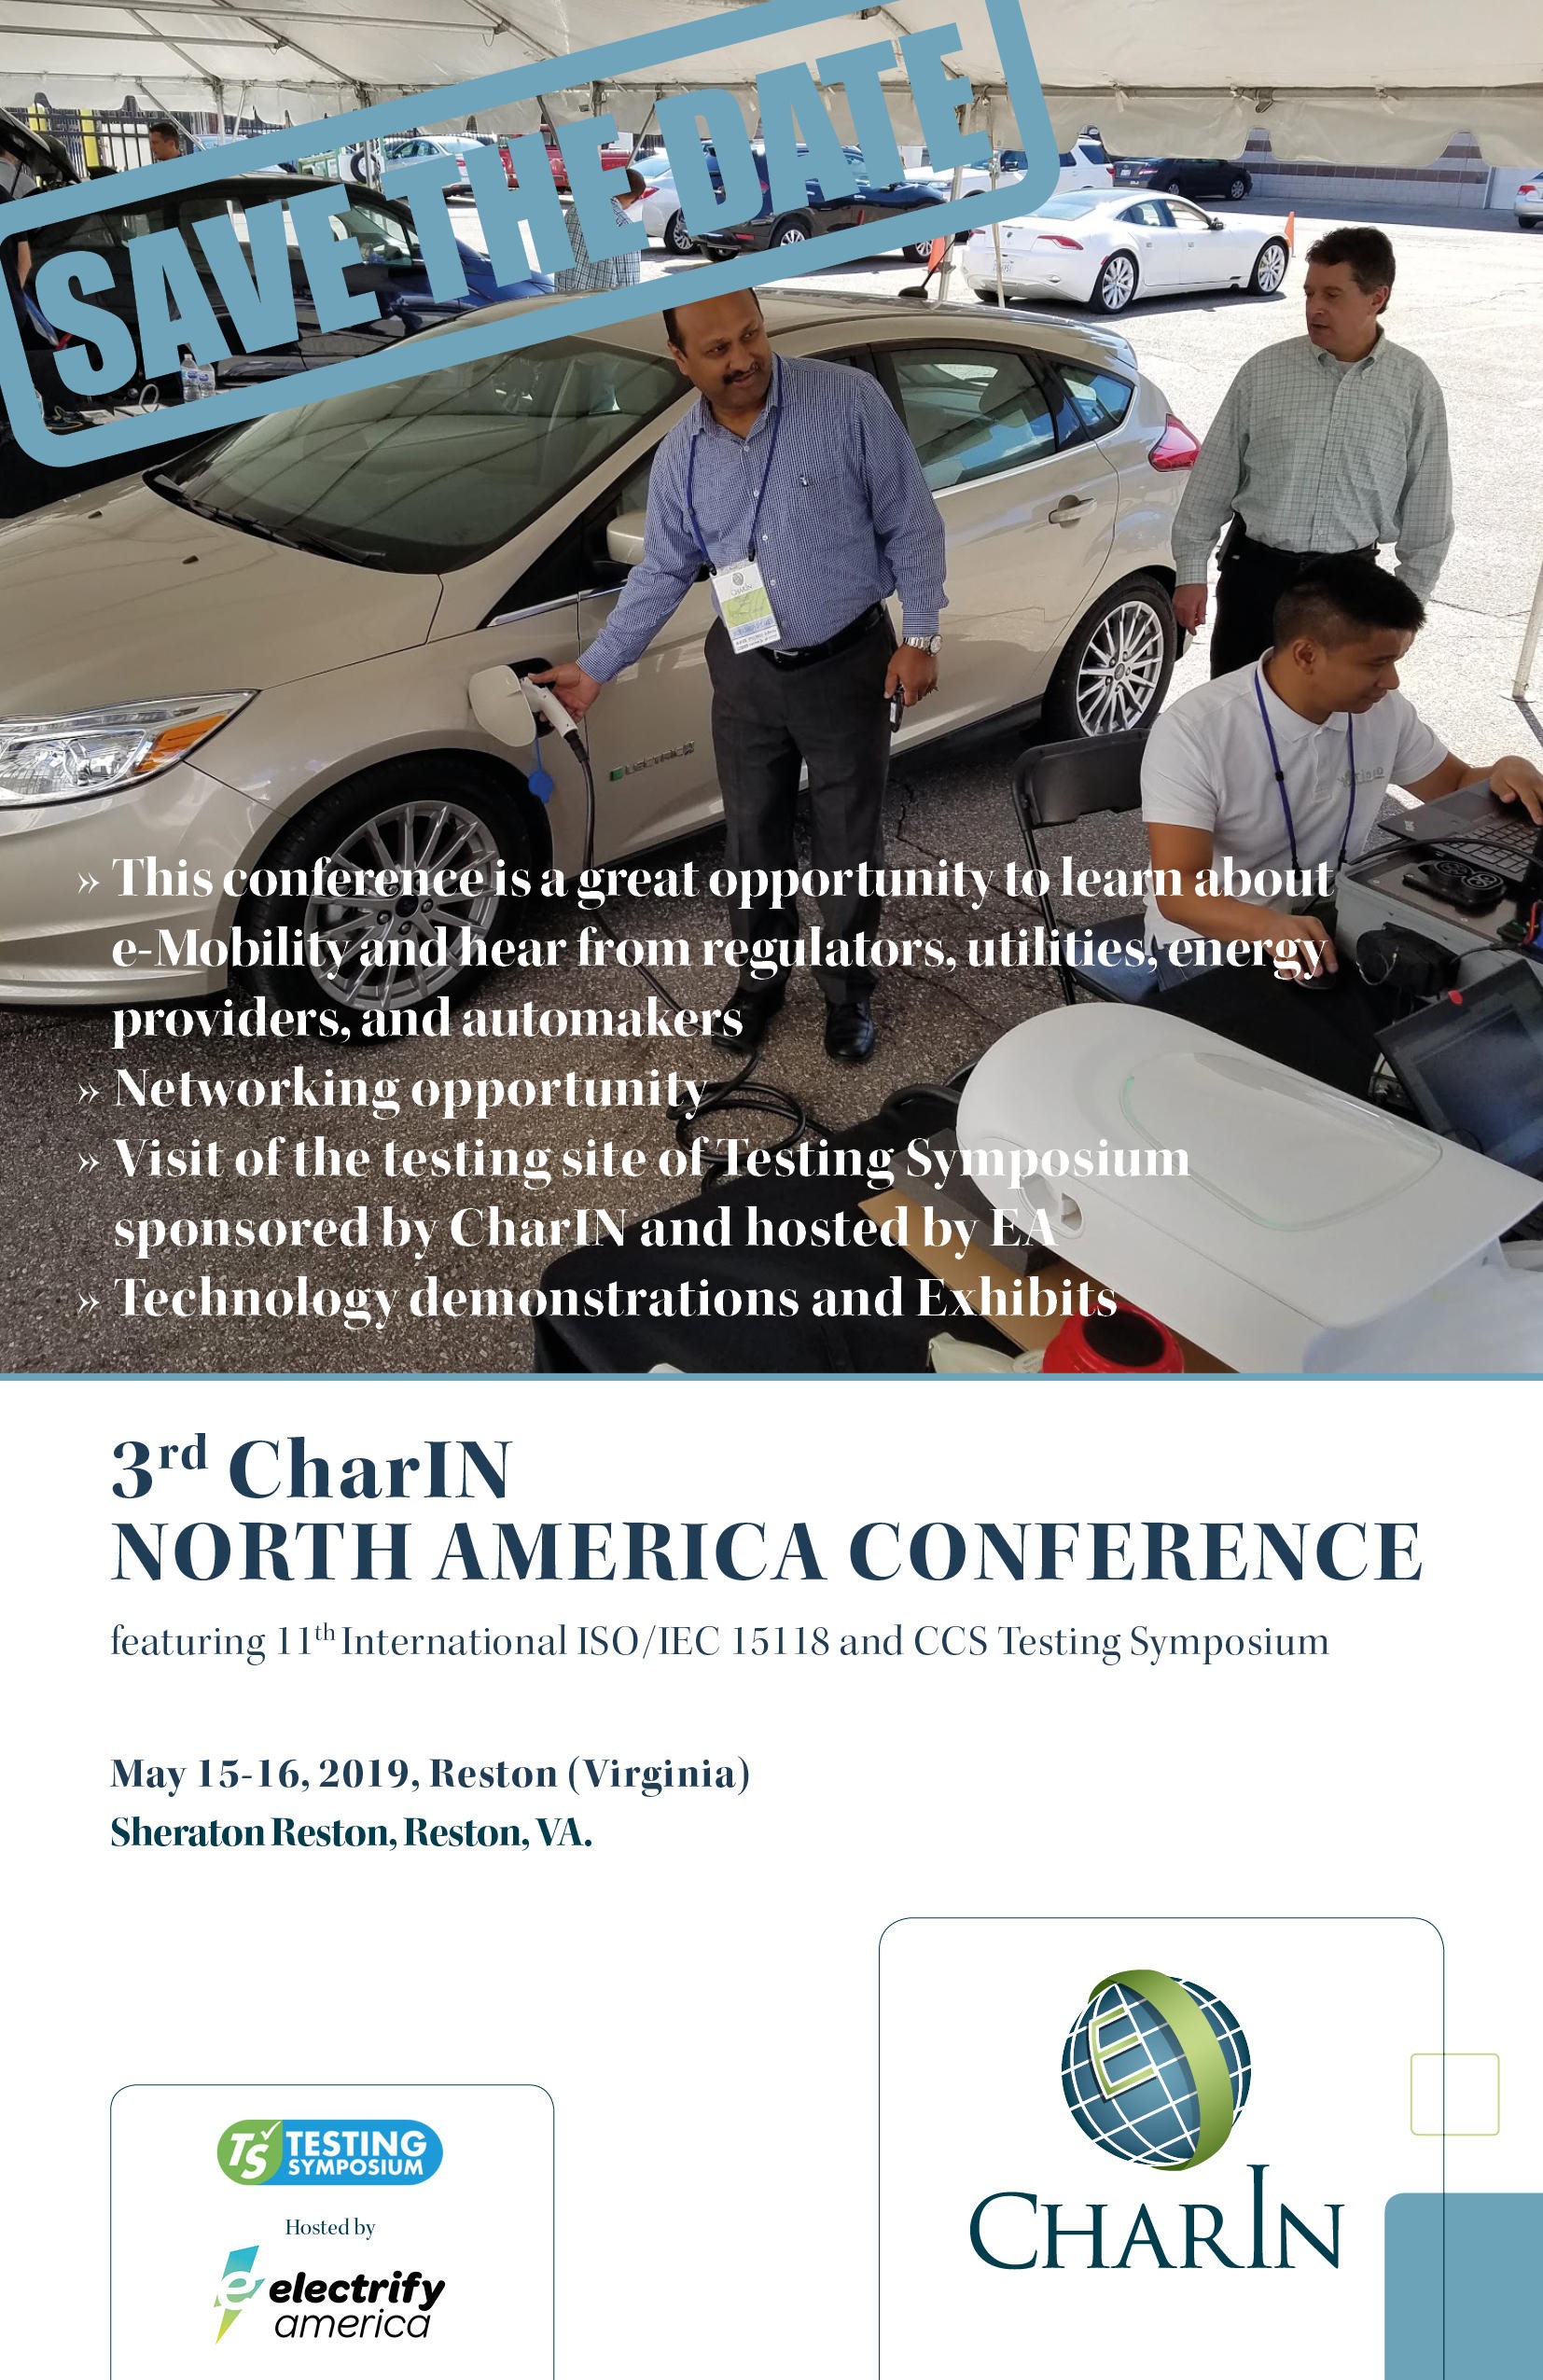 MARK YOUR CALENDARS! THE 3RD NORTH AMERICAN CHARIN CONFERENCE AND CCS (ISO/IEC 15118) INTEROP EVENT WILL TAKE PLACE ON MAY 15TH – 17TH IN RESTON!